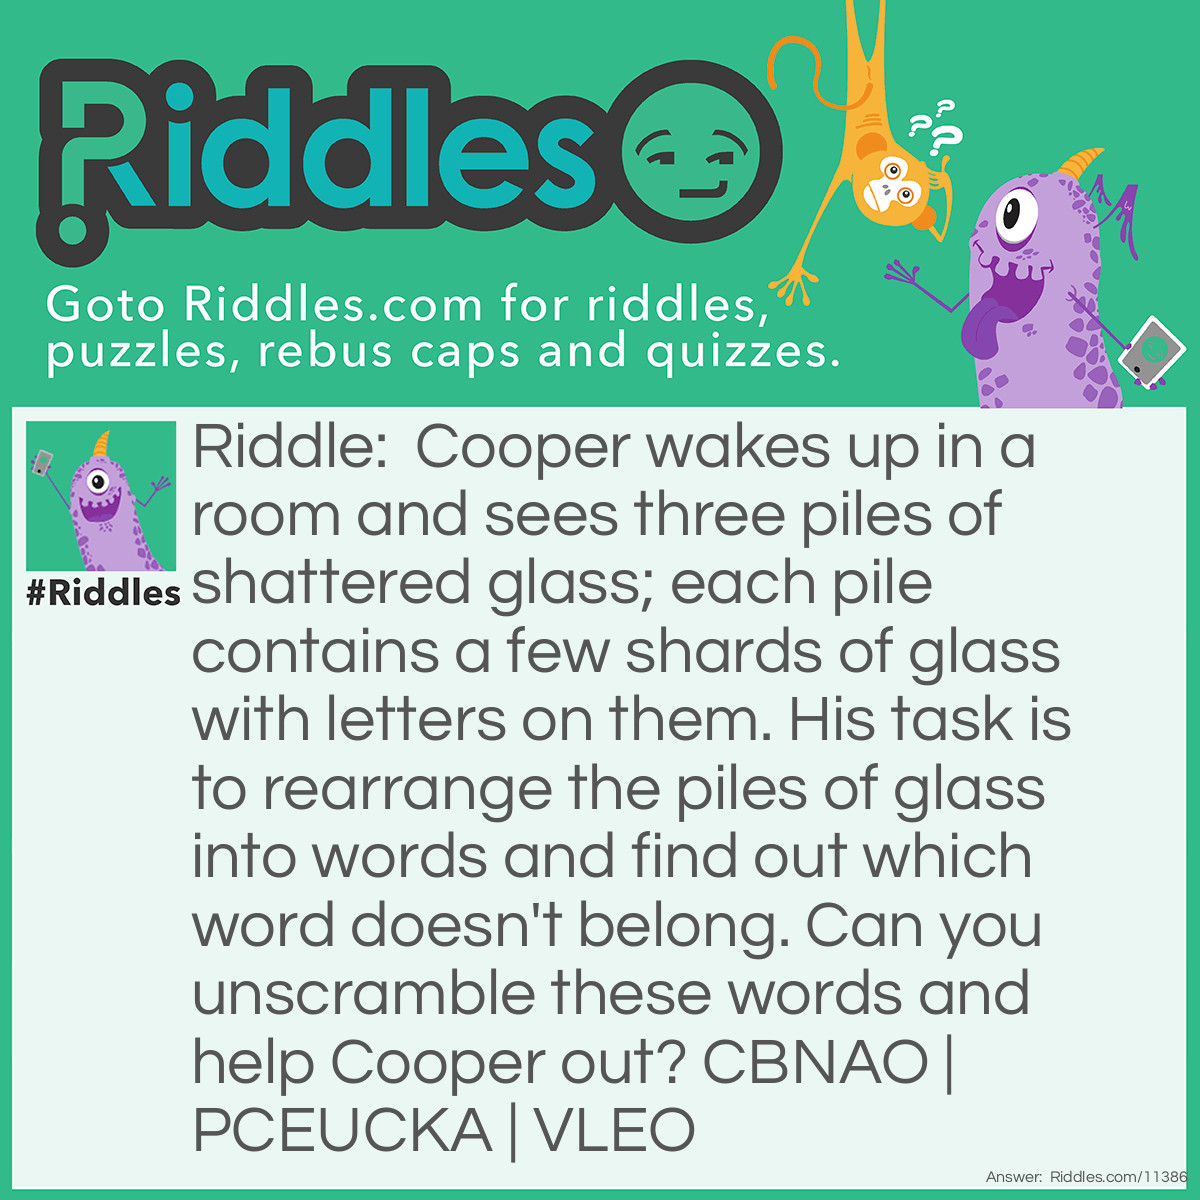 Riddle: Cooper wakes up in a room and sees three piles of shattered glass; each pile contains a few shards of glass with letters on them. His task is to rearrange the piles of glass into words and find out which word doesn't belong. Can you unscramble these words and help Cooper out? CBNAO | PCEUCKA | VLEO Answer: The three words are BACON, CUPCAKE, and LOVE. This riddle is open to many interpretations, so there are multiple answers. For example, BACON doesn't end with an E (unlike CUPCAKE and LOVE). However, CUPCAKE has three vowels (while BACON and LOVE have two each). On the other hand, LOVE is an emotion (while BACON and CUPCAKE are foods). No matter which word you pick, there is at least one reason for it being correct.